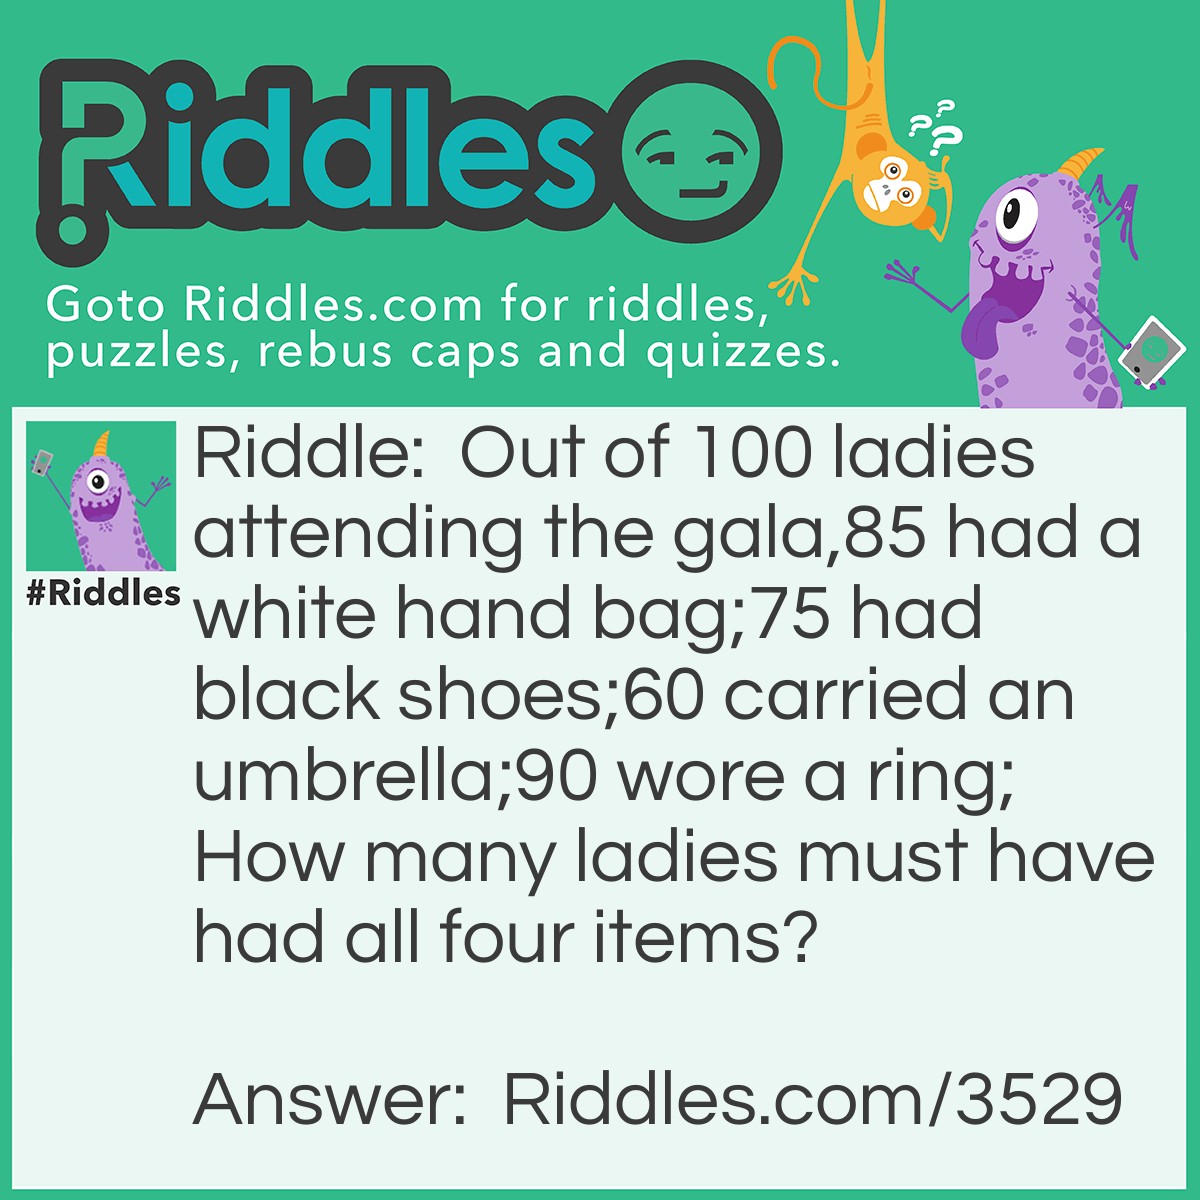 Riddle: Out of 100 ladies attending the gala,85 had a white hand bag;75 had black shoes;60 carried an umbrella;90 wore a ring;
How many ladies must have had all four items? Answer: 10
Divide by 3. All the ladies had three items. The remainder shows the number of ladies who had 4.
85756090______310 / 3 = 100 + 10 remainder